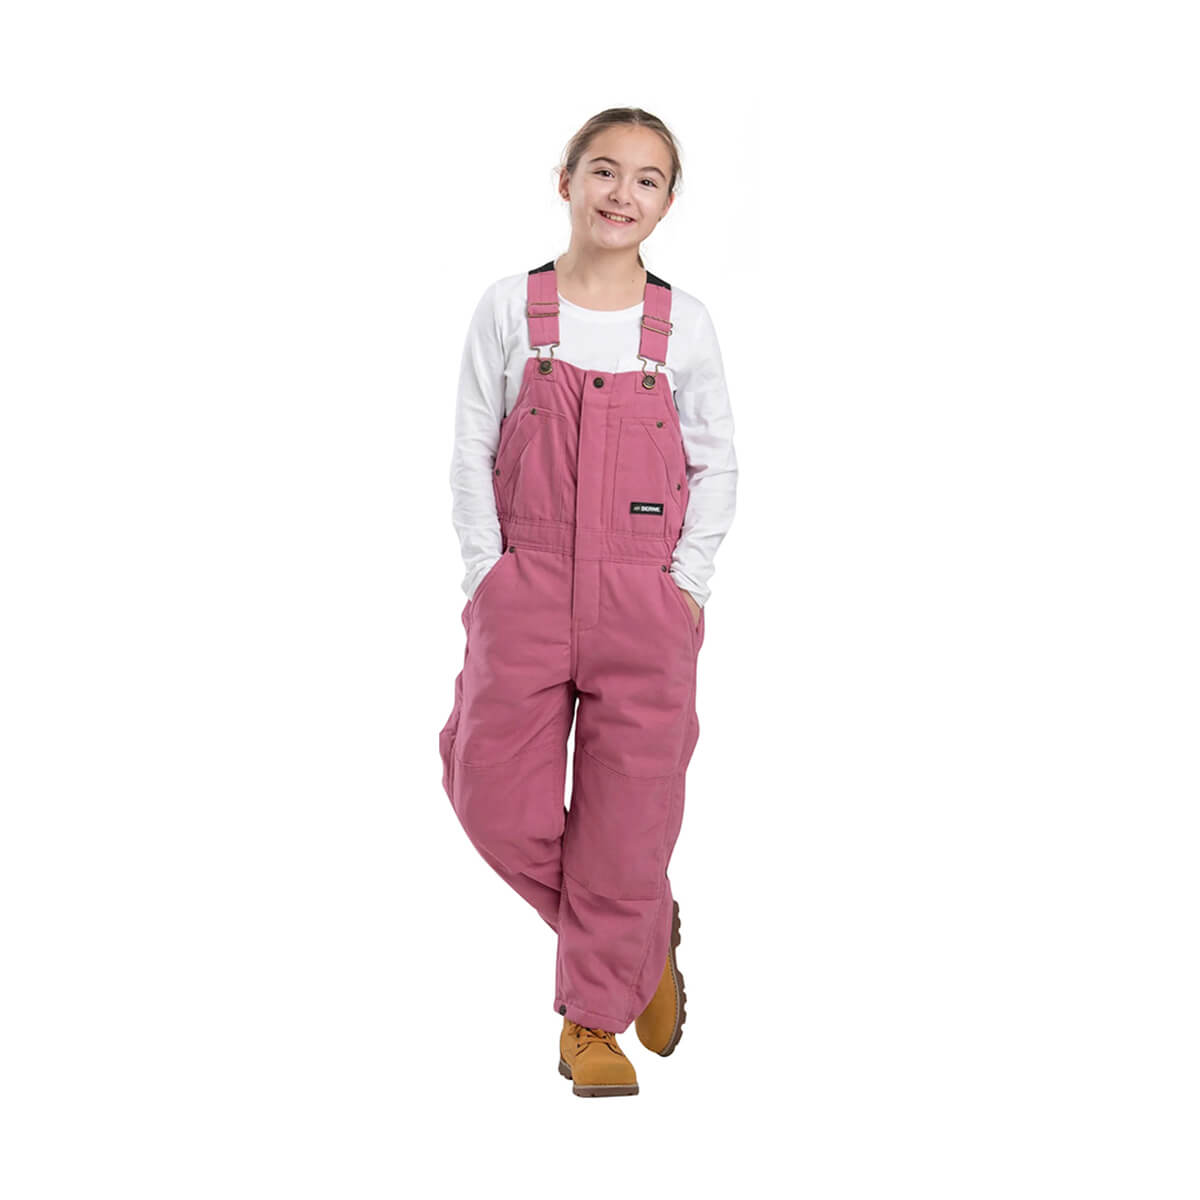 Berne Youth Softstone Insulated Bib Overall - Rose